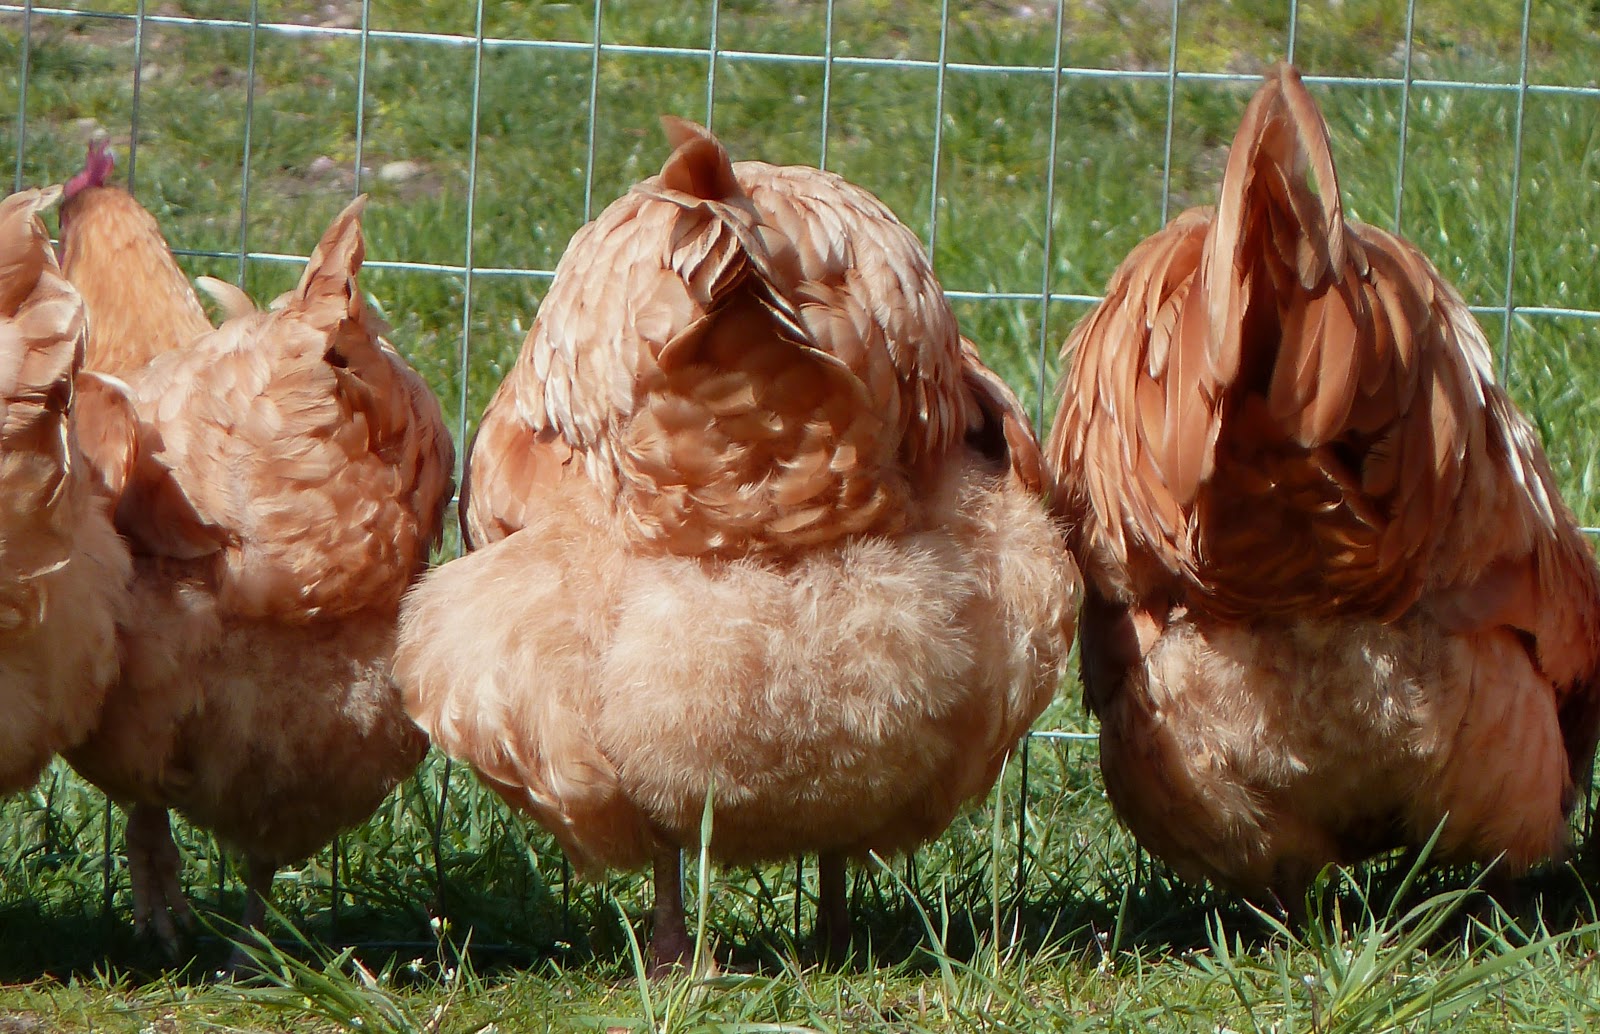 I know it's a little strange but seriously, could a chicken butt be an...